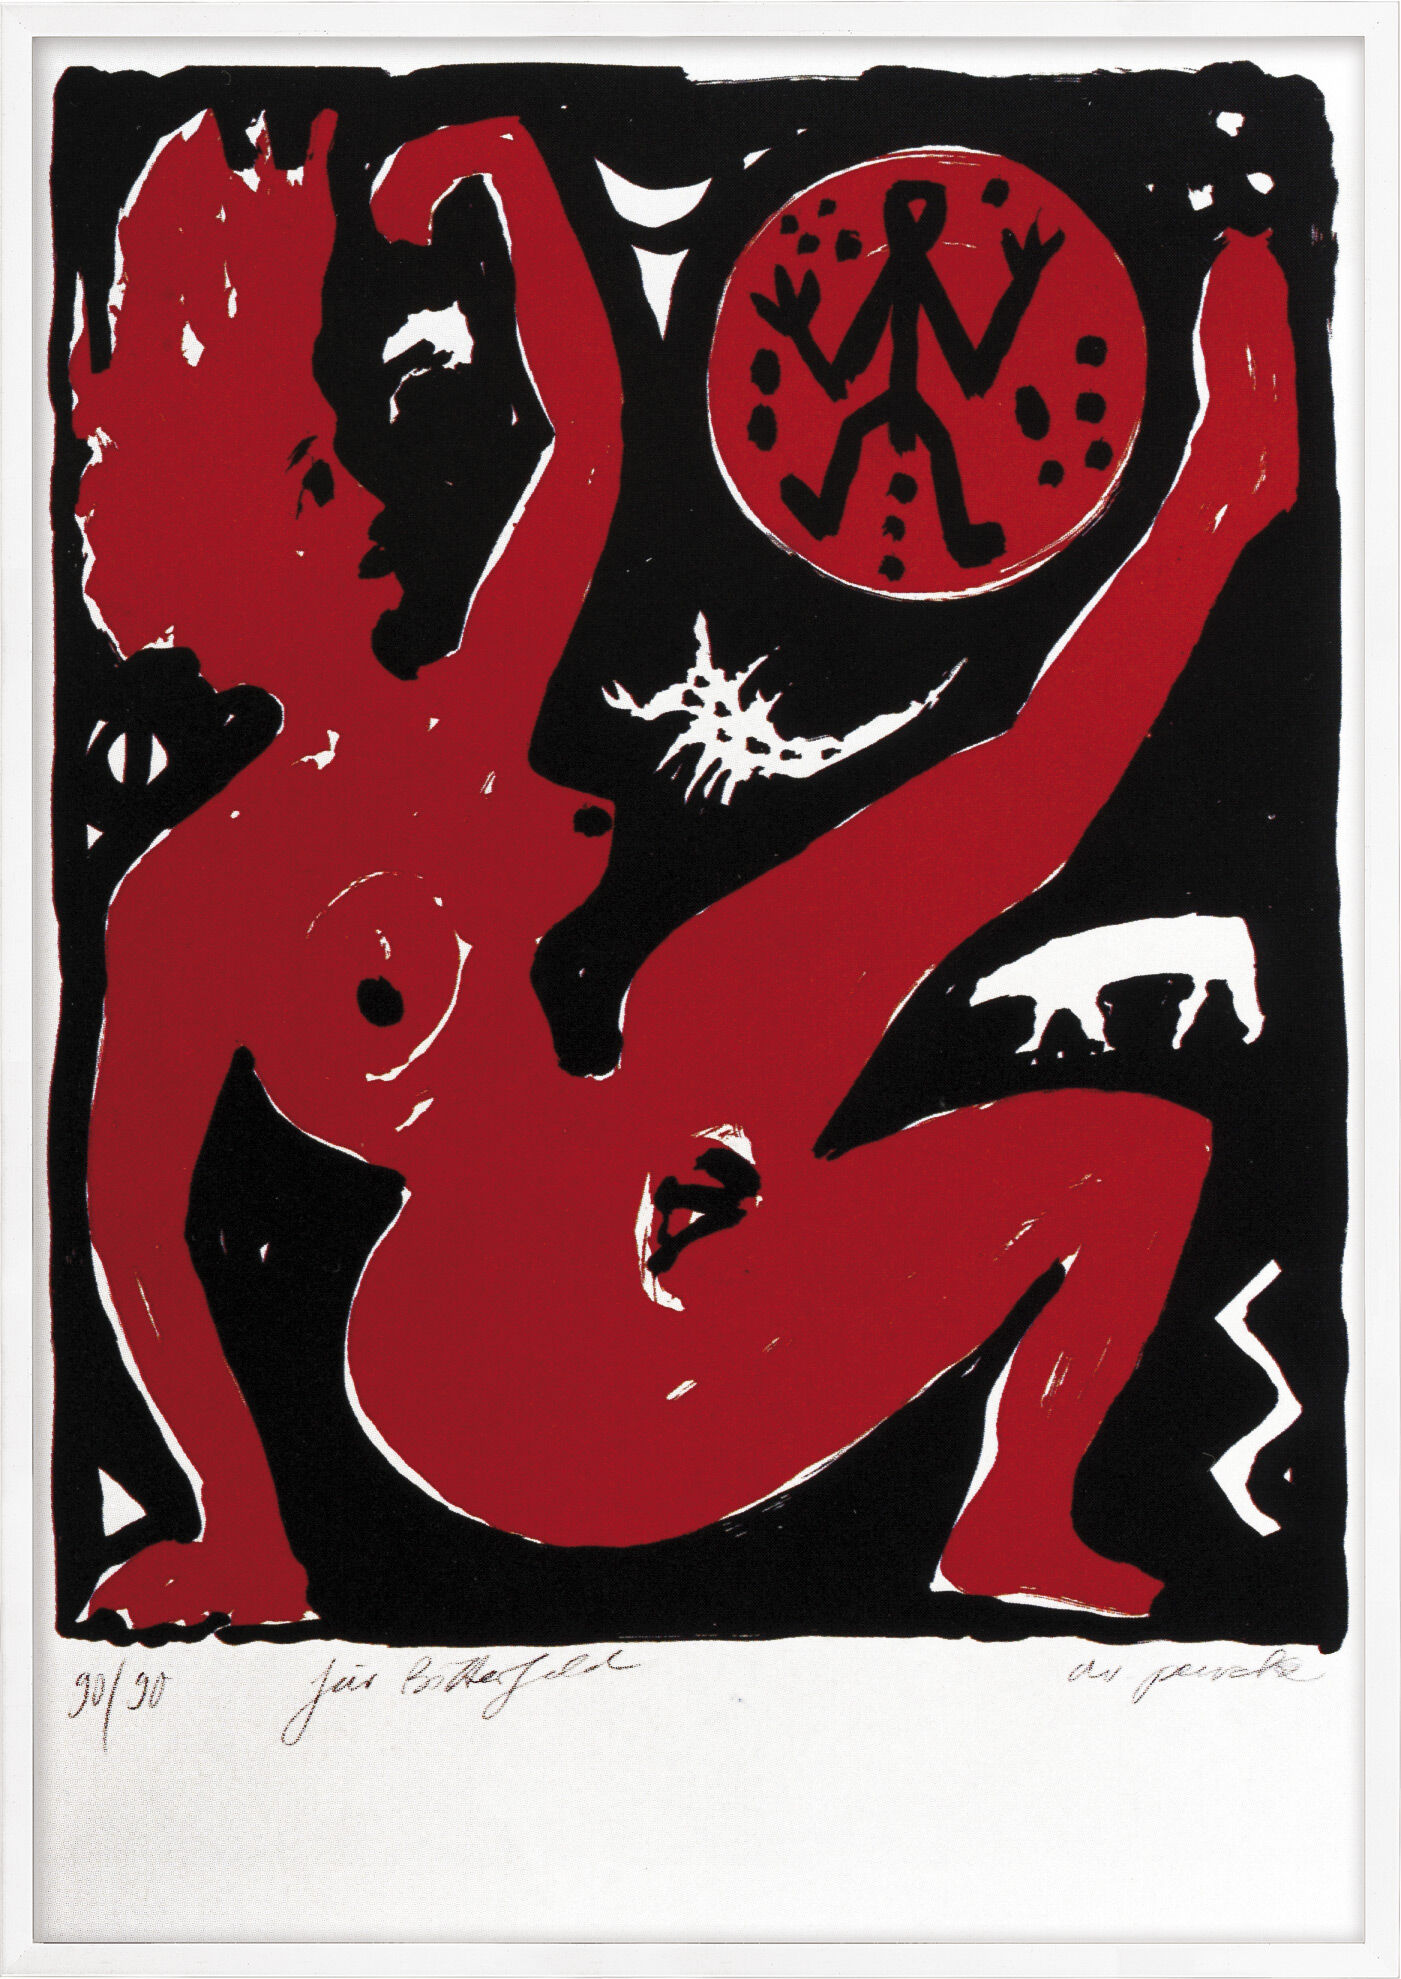 Picture "For Bitterfeld" (1990) by A. R. Penck